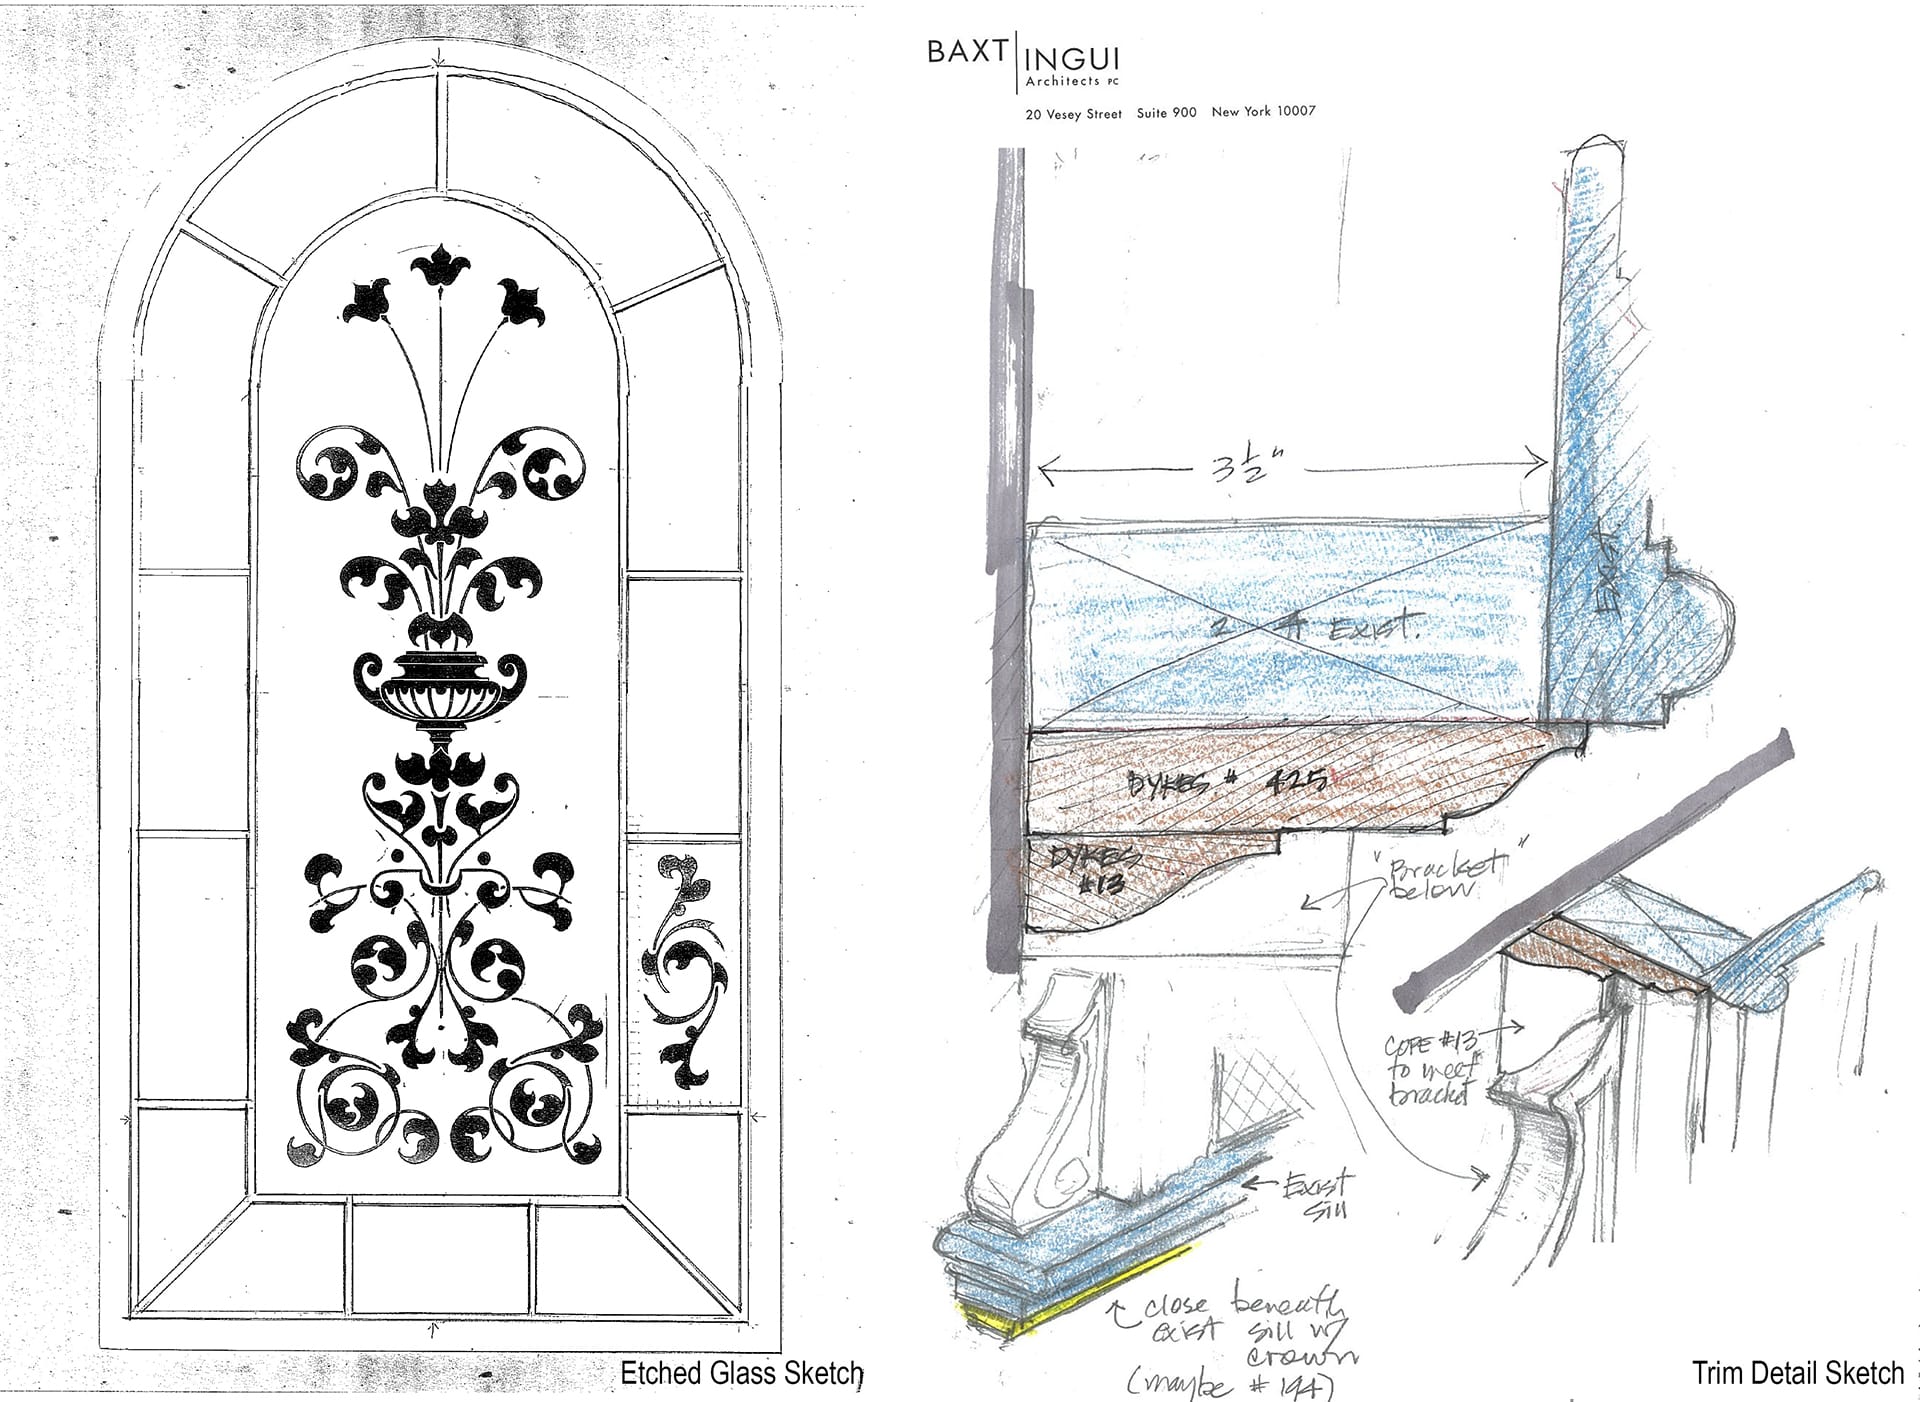 Sketches of a vintage-inspired etched window that will be artificially lit with LED Lights